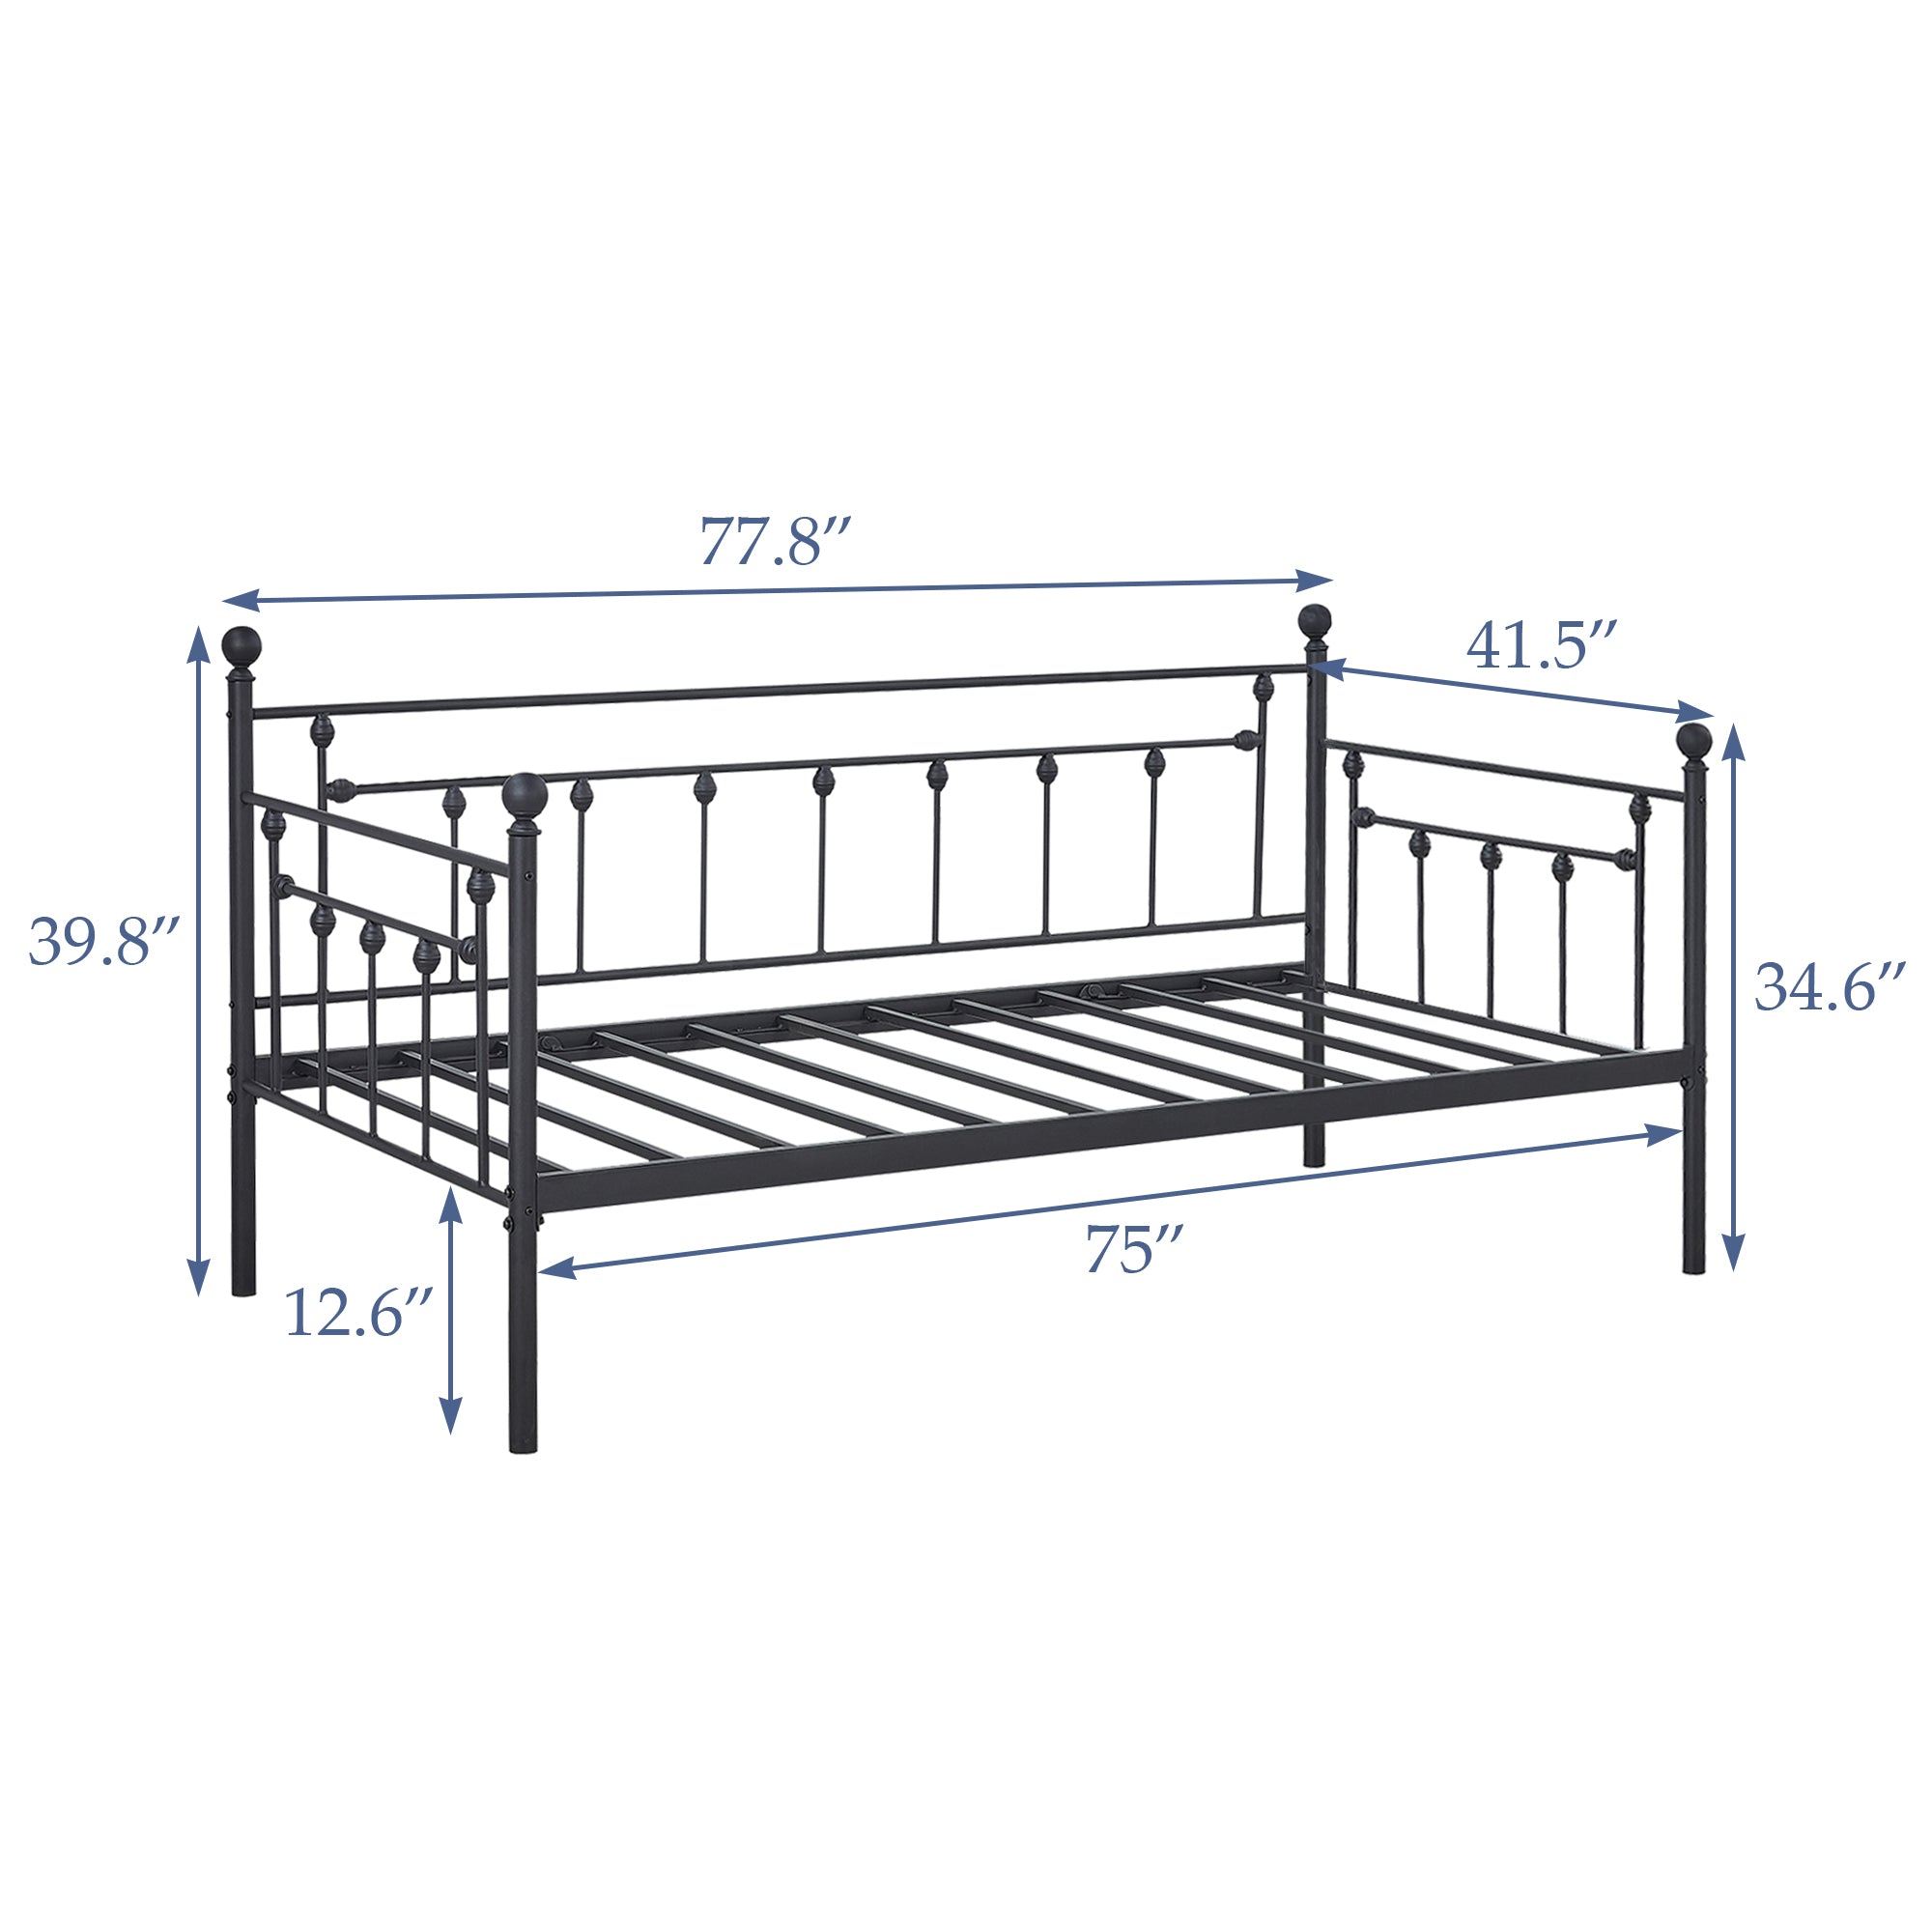 VECELO Daybed Frame, Twin Size Metal Platform Bed with Headboard